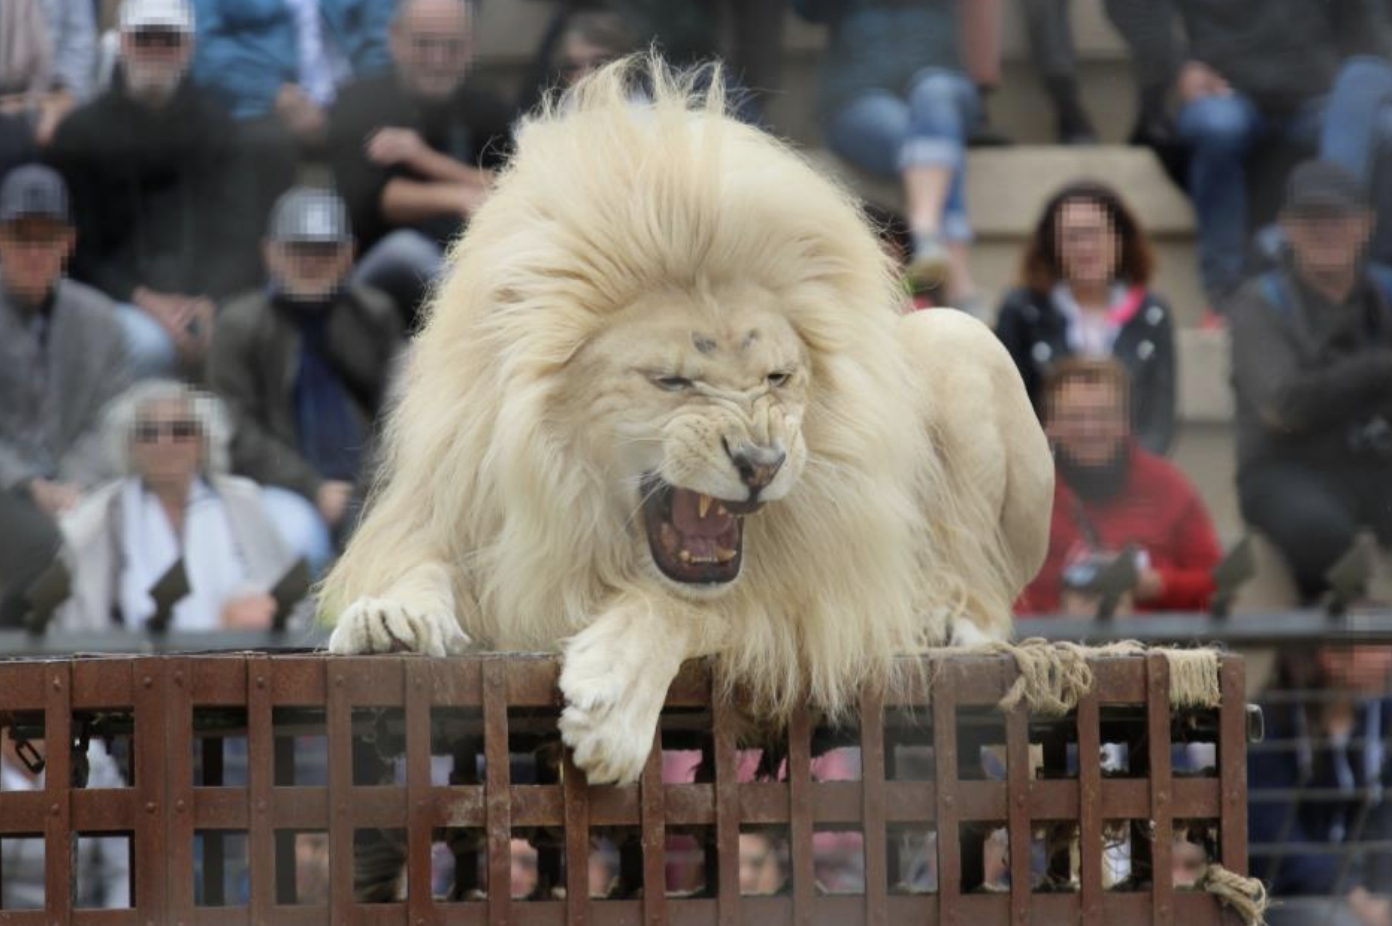 Lions and Tigers Forced to Take Part in 'Gladiator-style' Amphitheater  Shows, Shocking Report Reveals